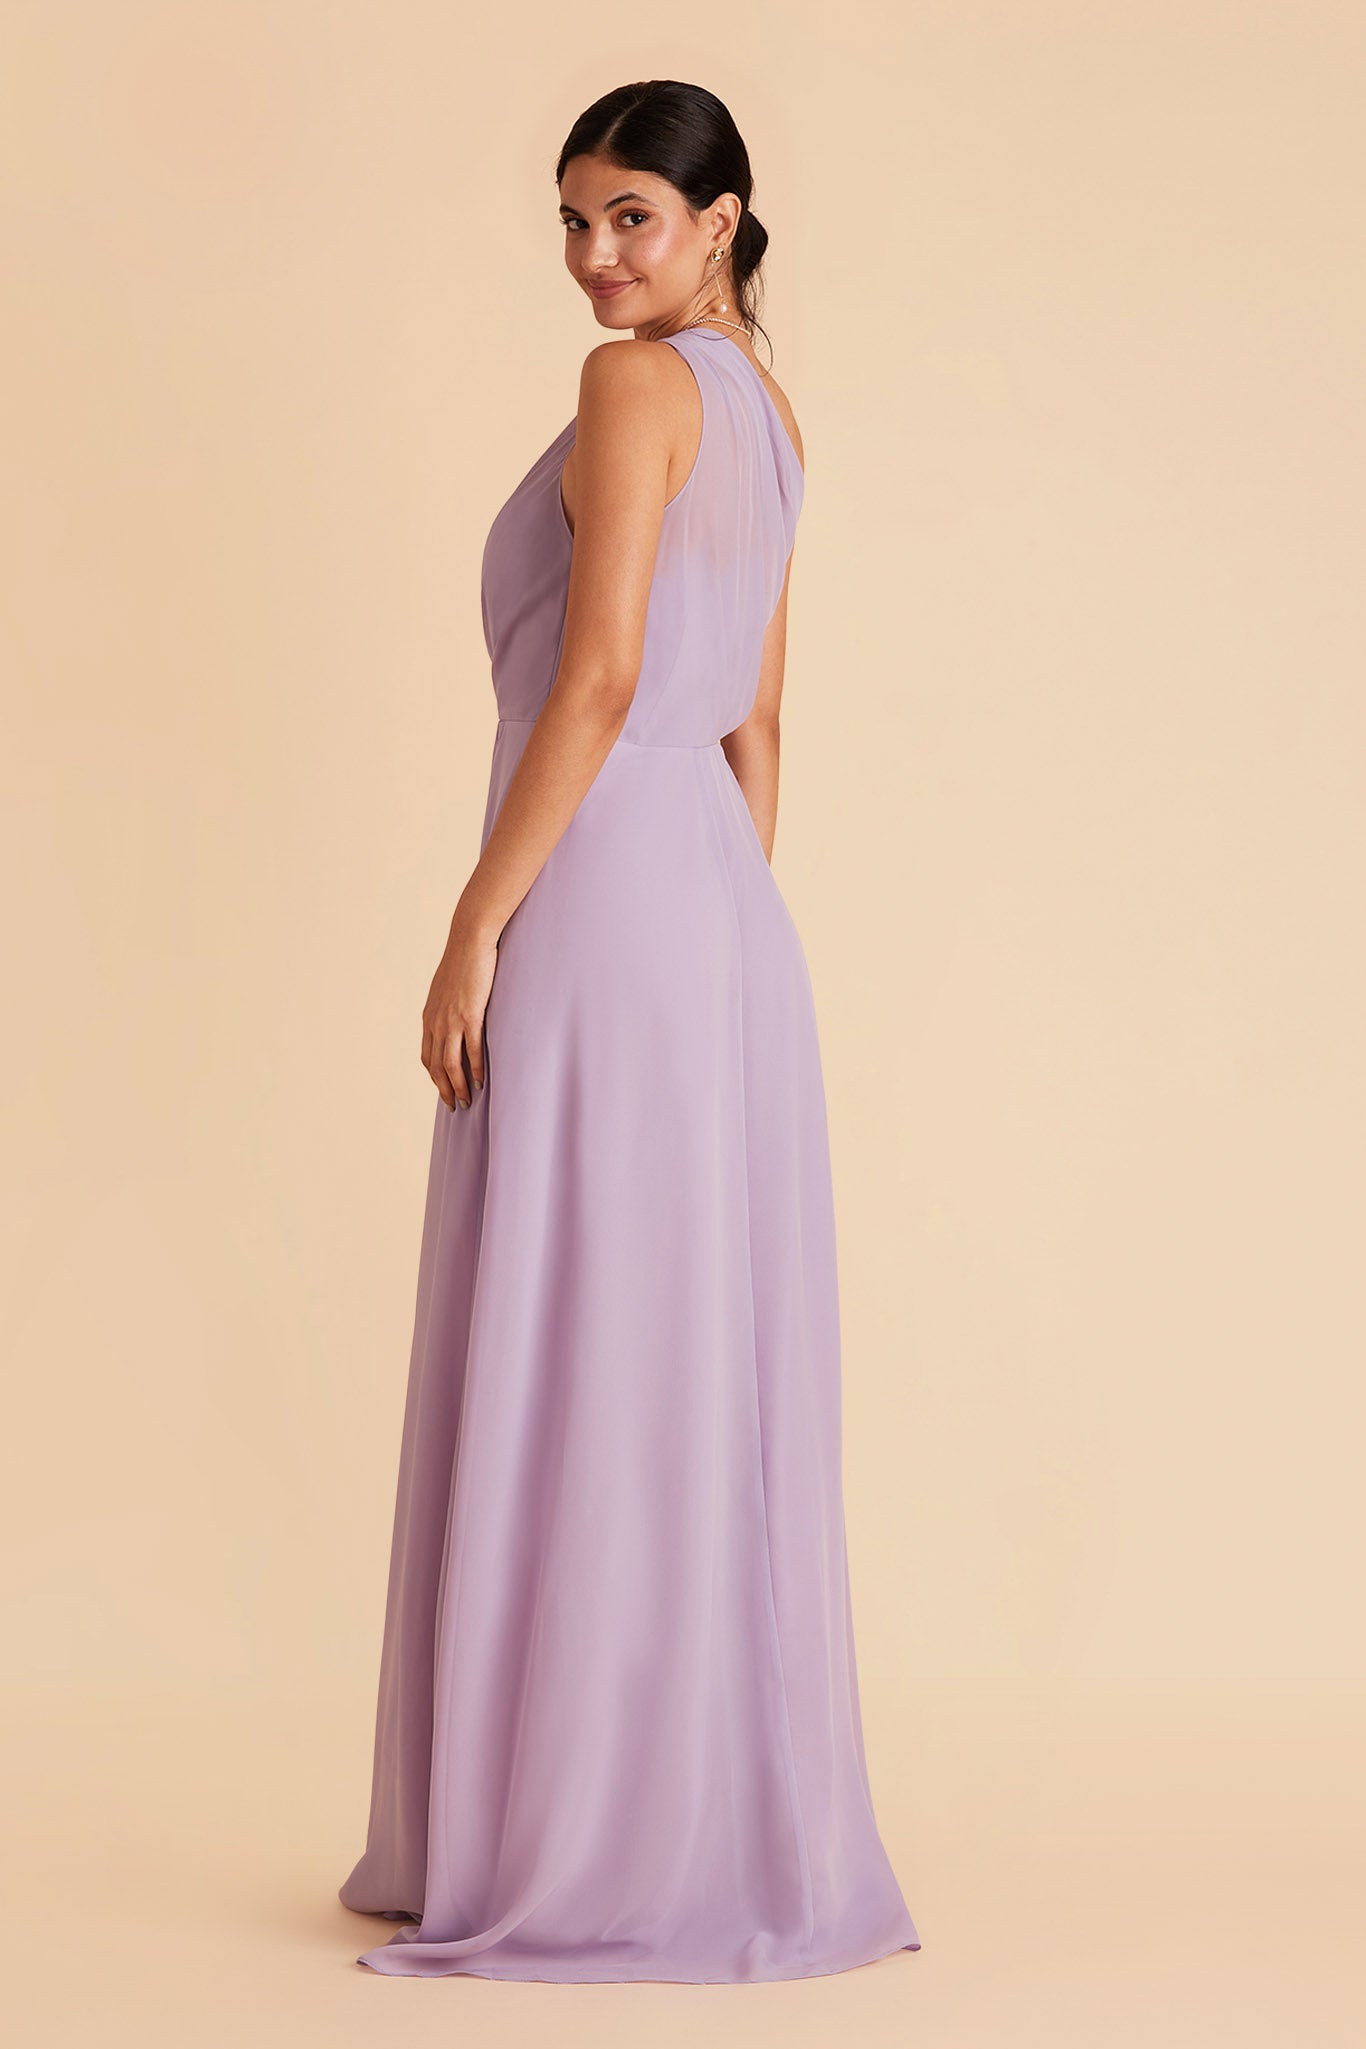 Kira bridesmaid dress with slit in lavender chiffon by Birdy Grey, side view